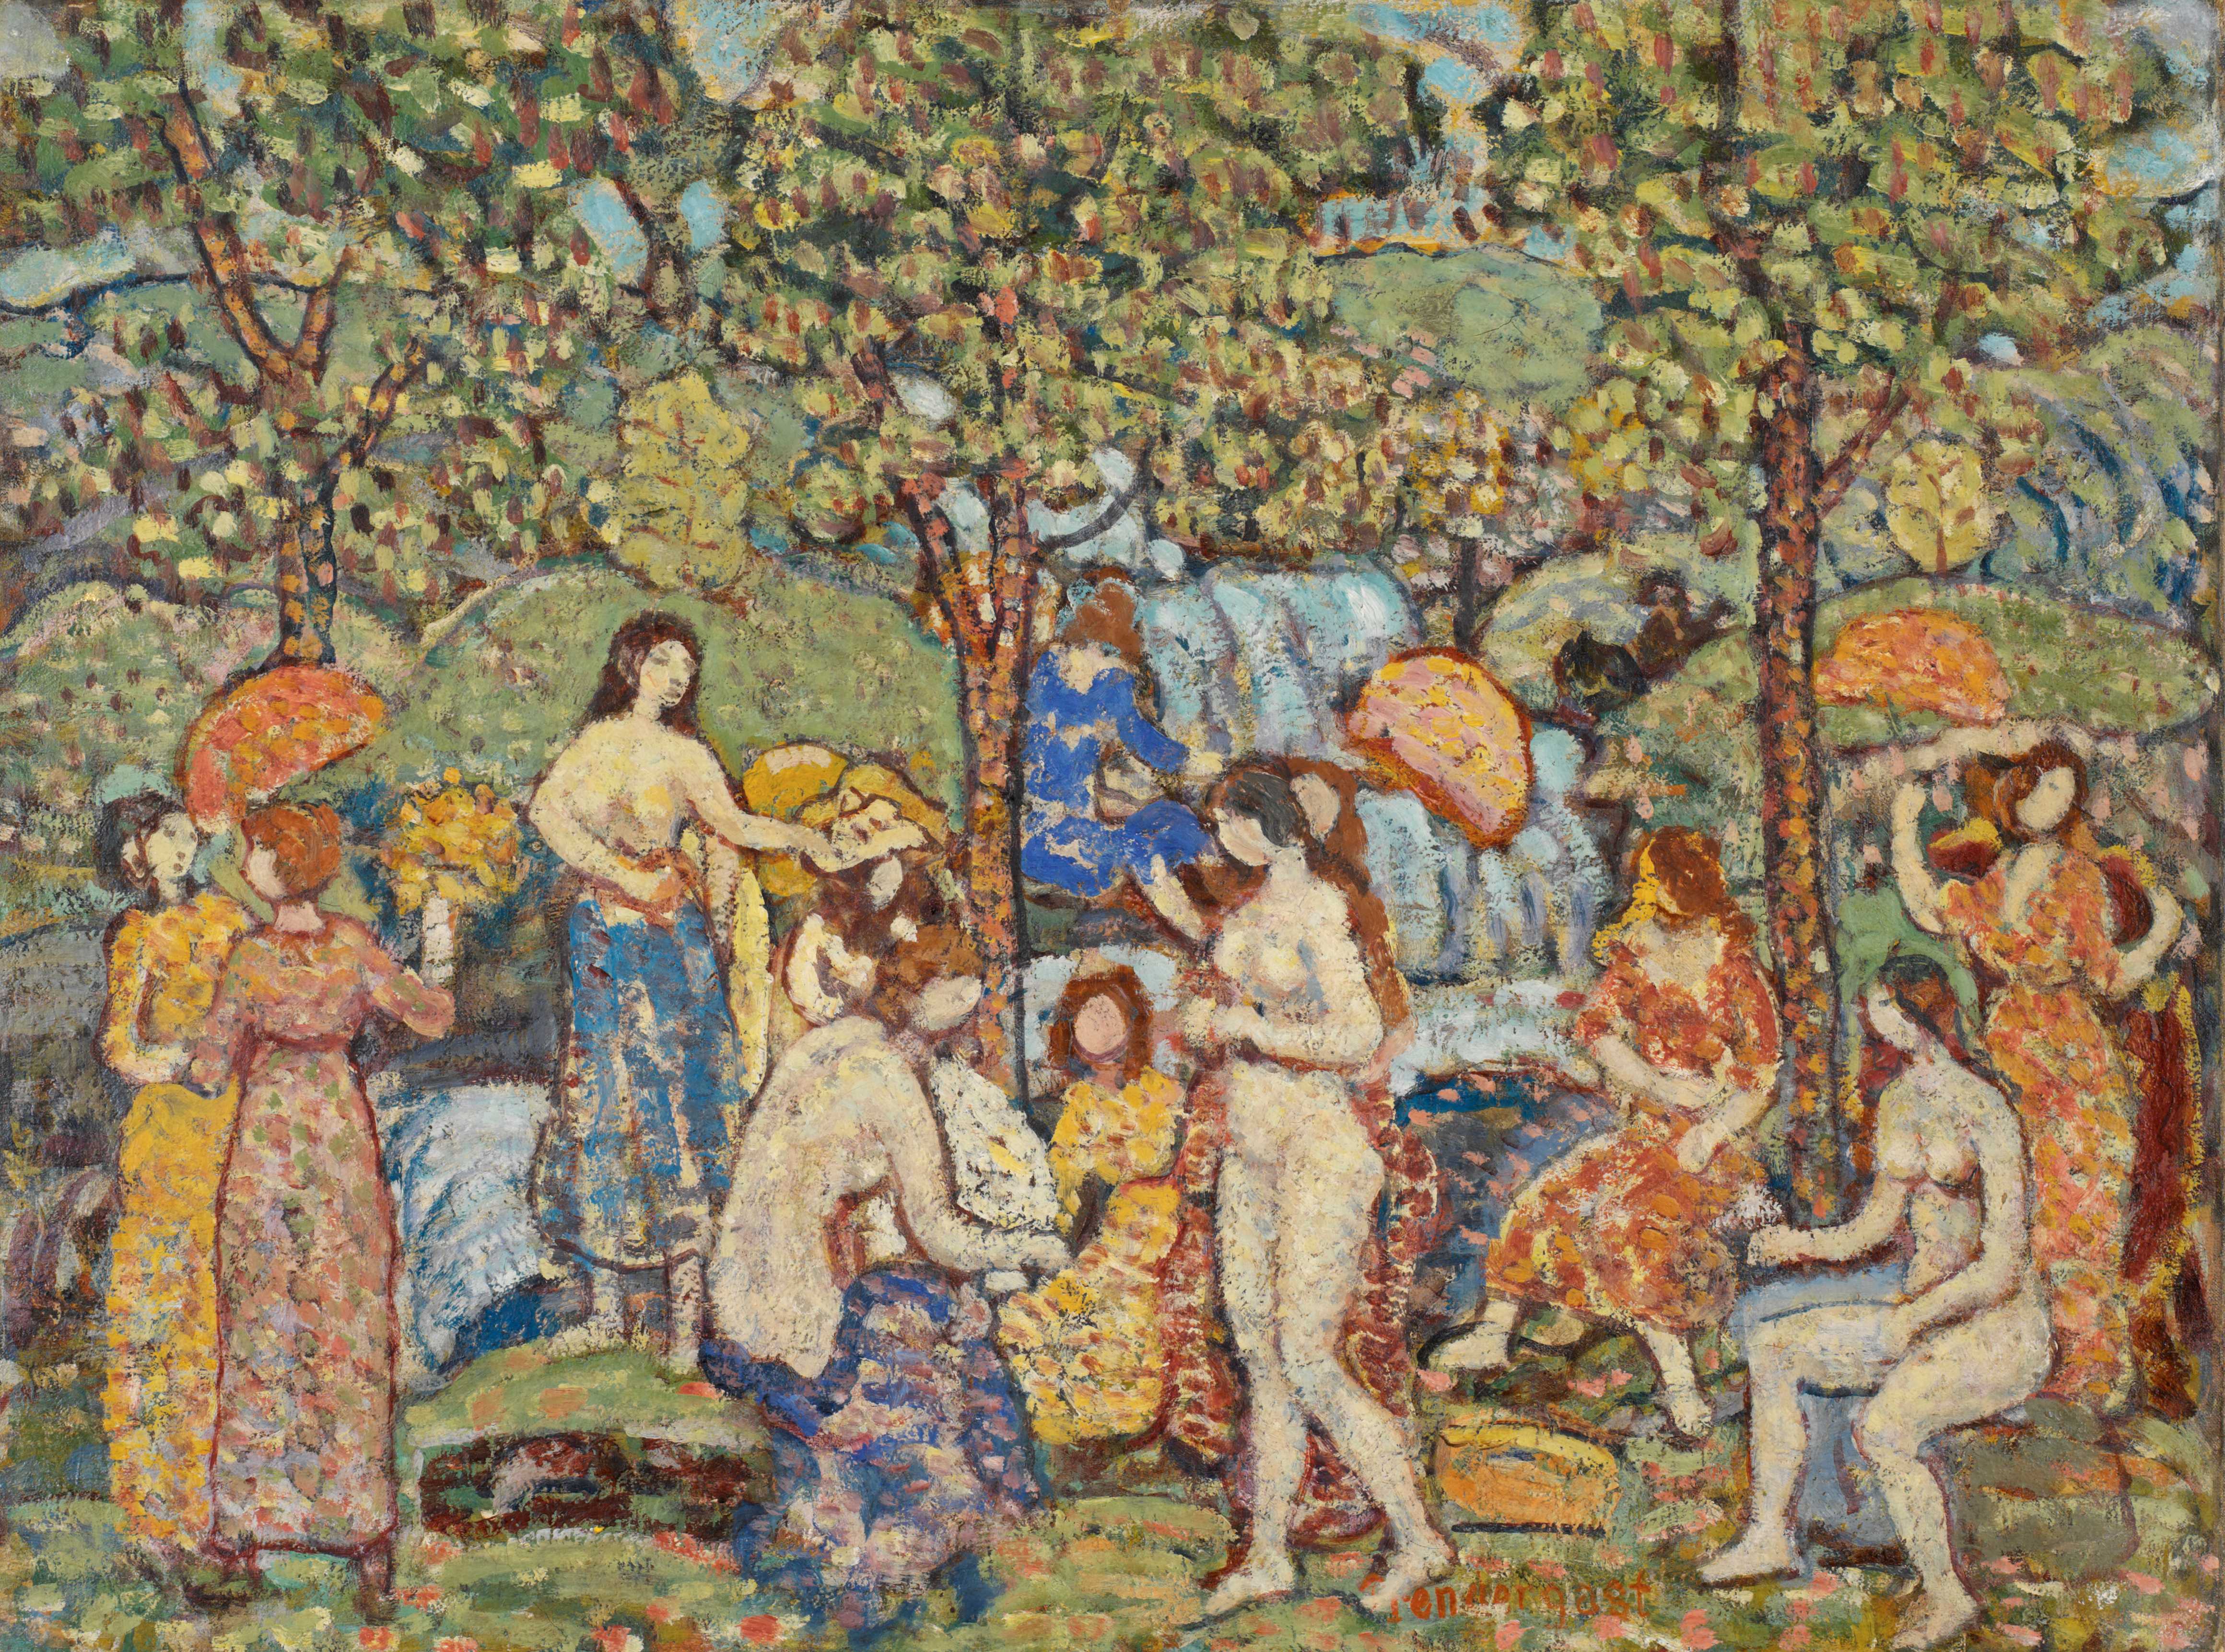 Find out more about Maurice Brazil Prendergast - Idyll